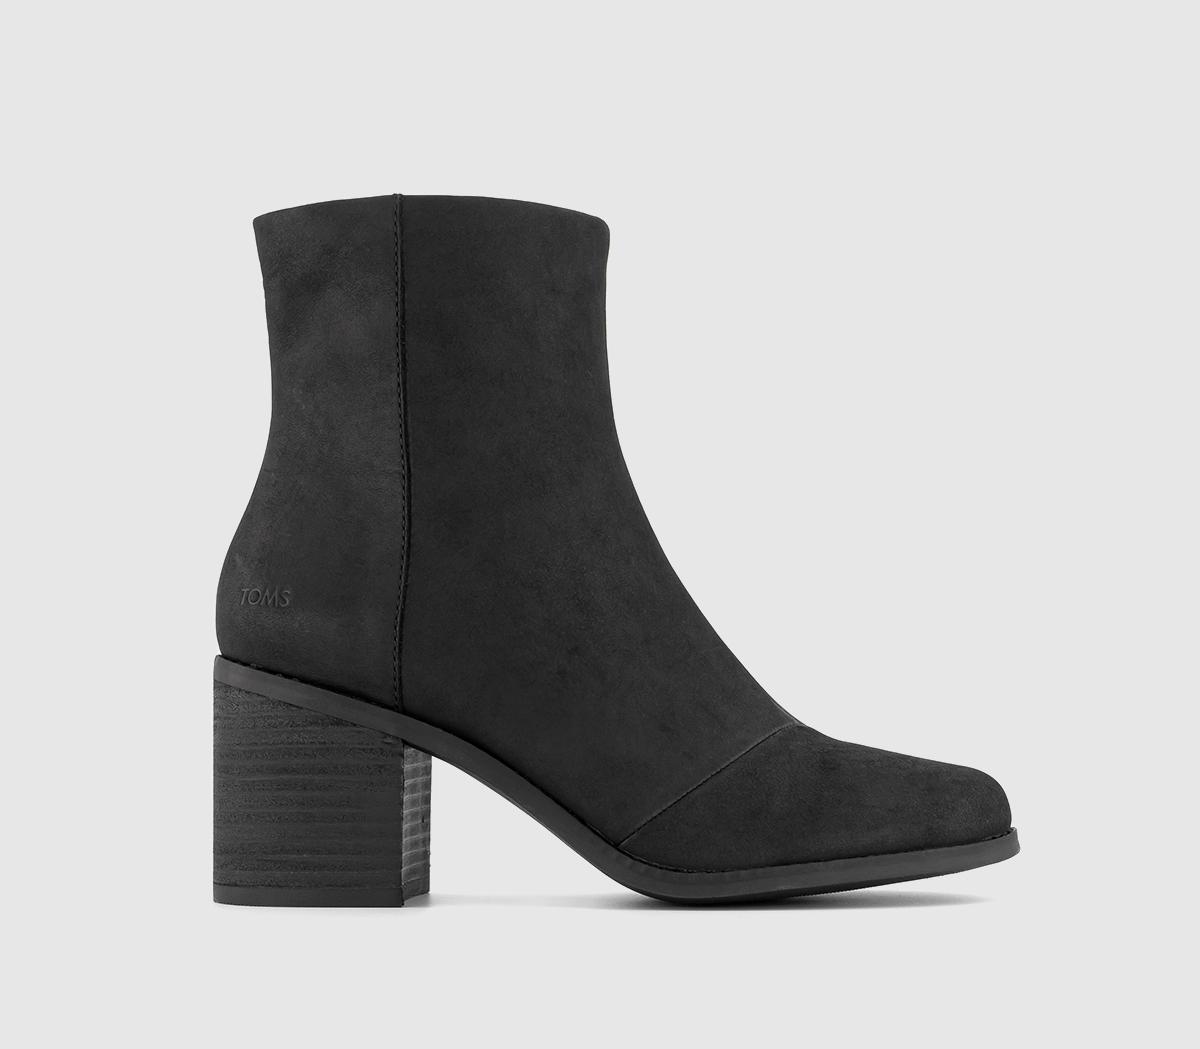 Evelyn Heeld Boots Black Leather